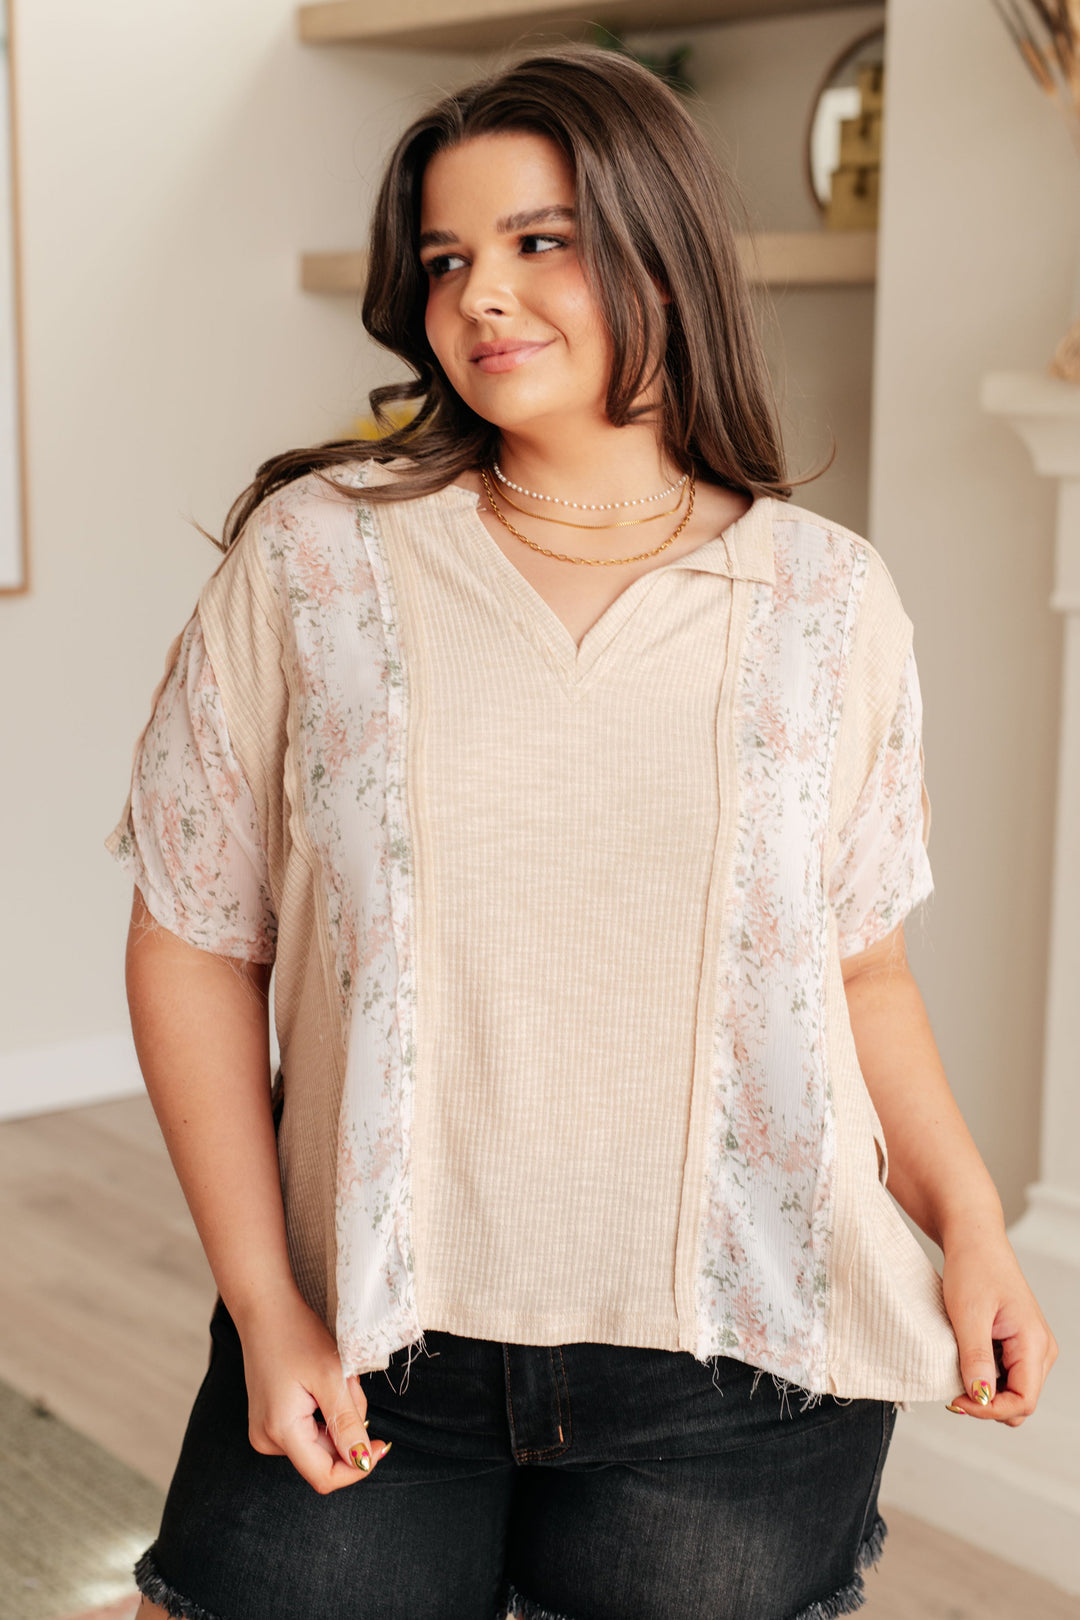 Mention Me Floral Accent Top in Toasted Almond-Short Sleeve Tops-Inspired by Justeen-Women's Clothing Boutique in Chicago, Illinois